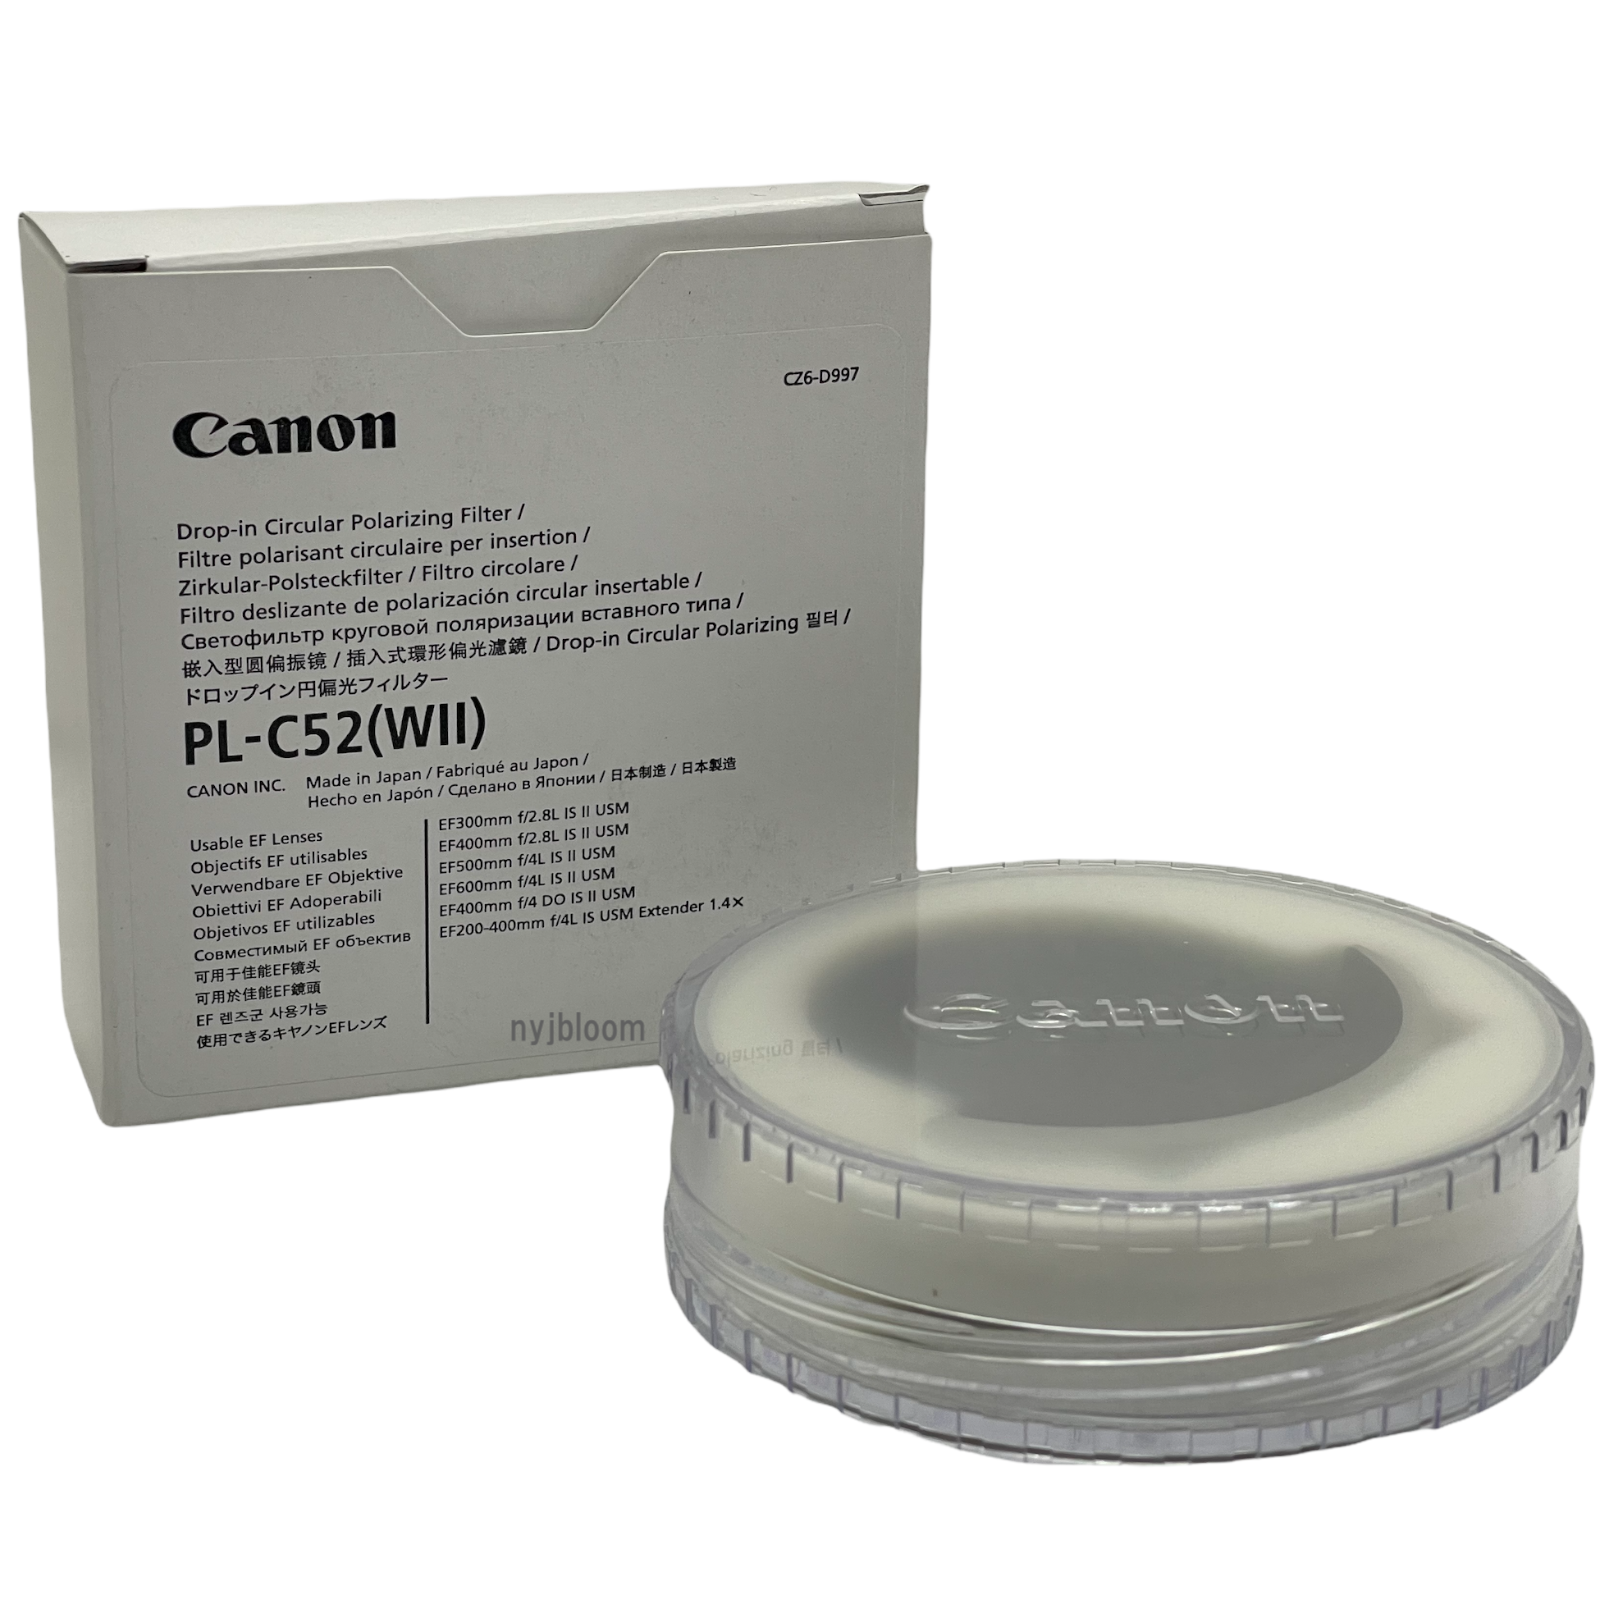 Canon 52mm Drop-in Circular Polarizing Filter for sale online | eBay